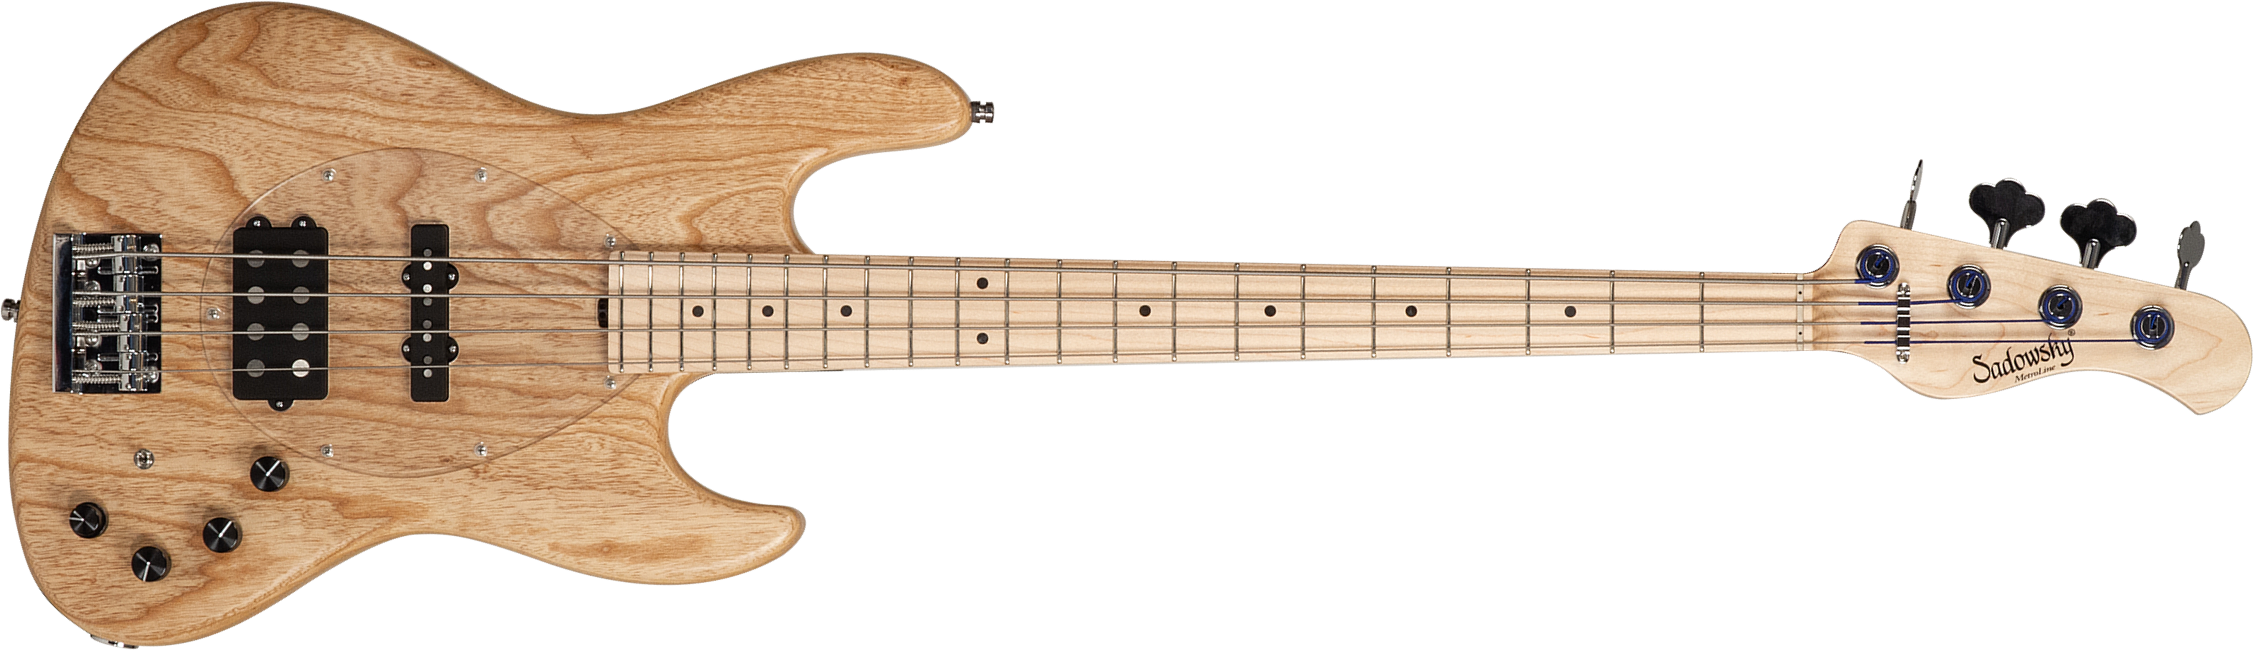 Sadowsky Vintage M/j Bass 21f Ash 4c Metroline All Active Mn - Natural Satin - Solid body electric bass - Main picture